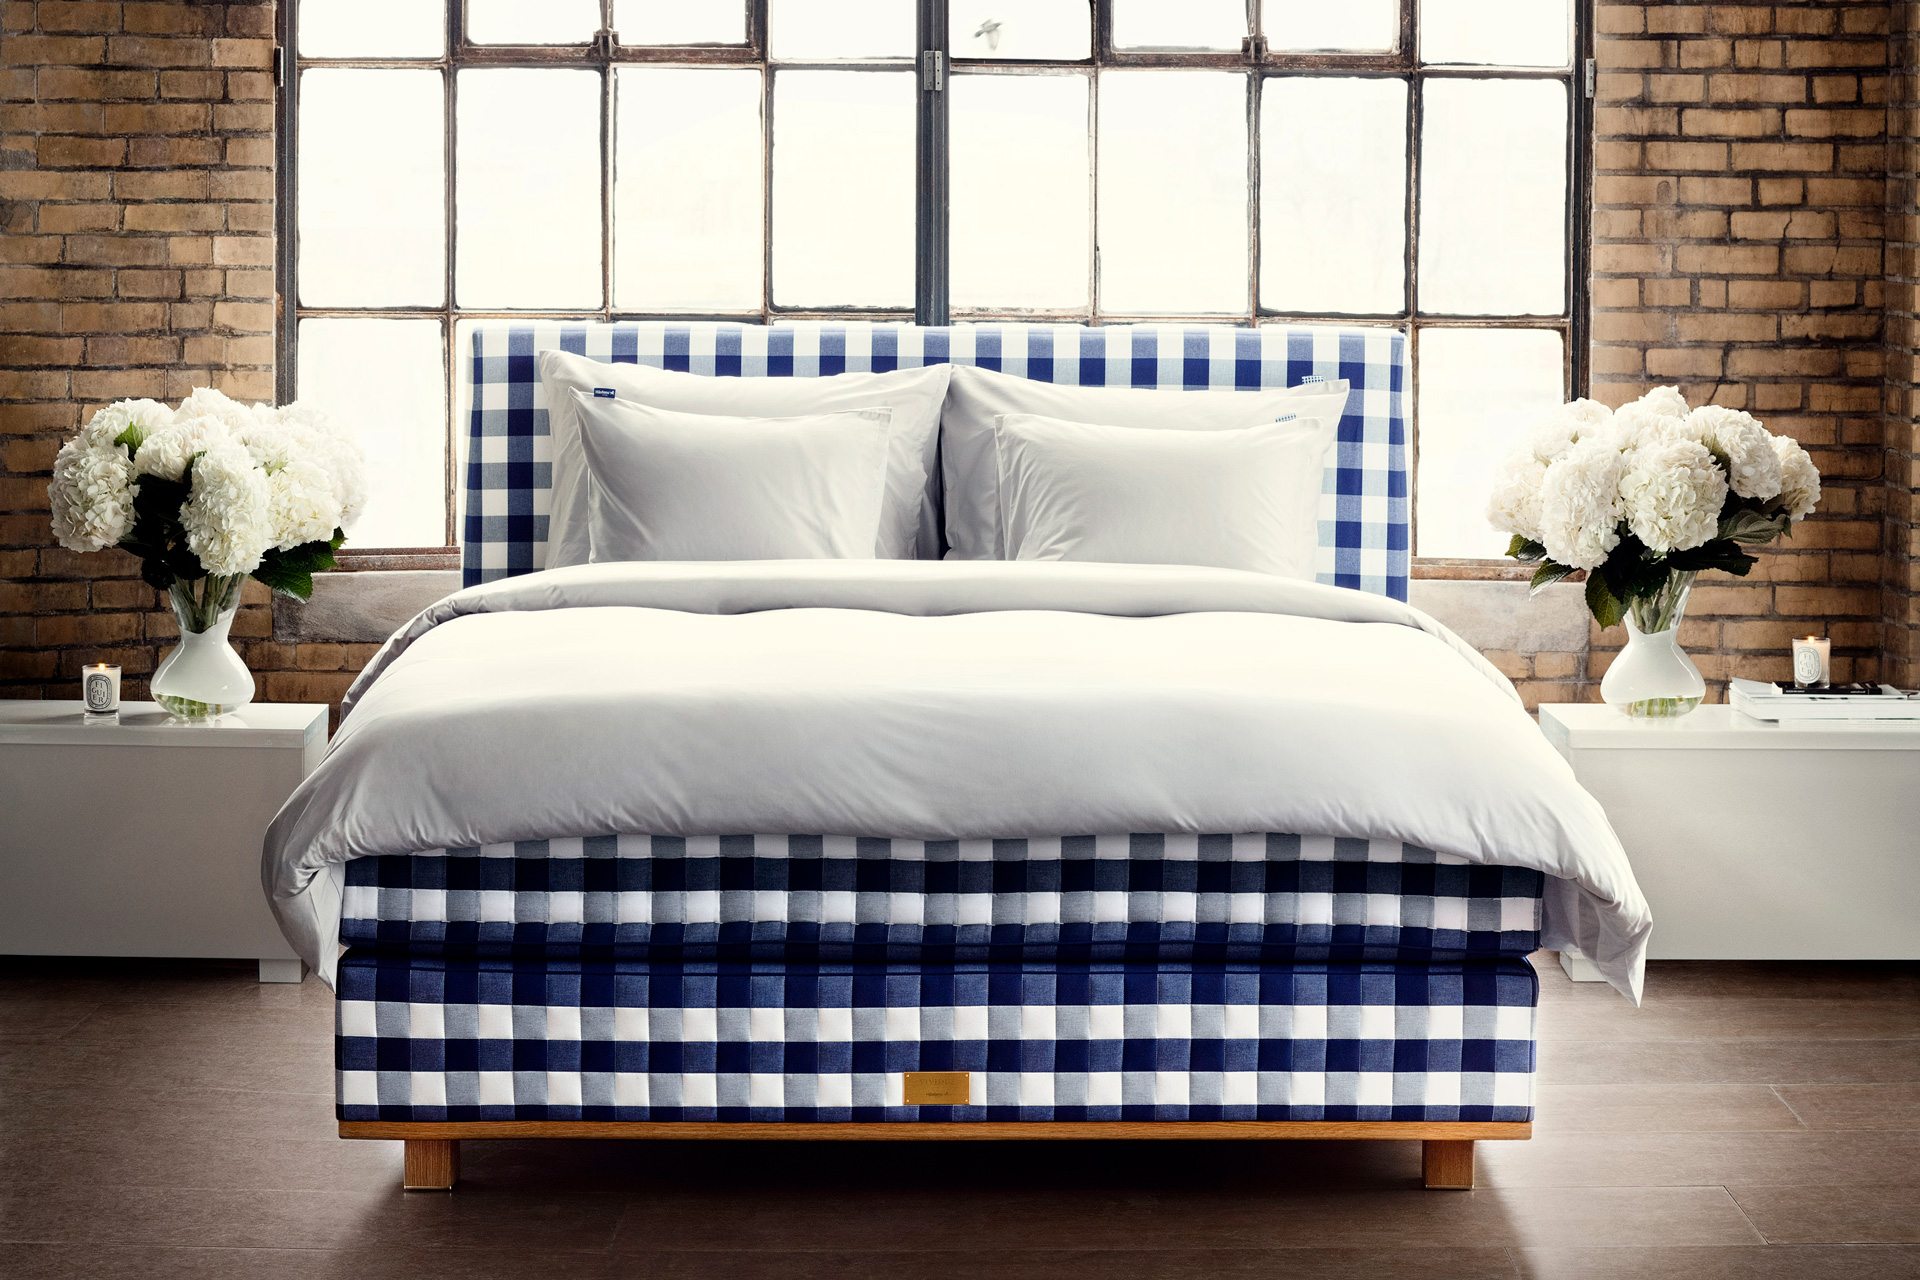 The Most Luxurious Beds In World, Average Cost Of Bed Frame Uk